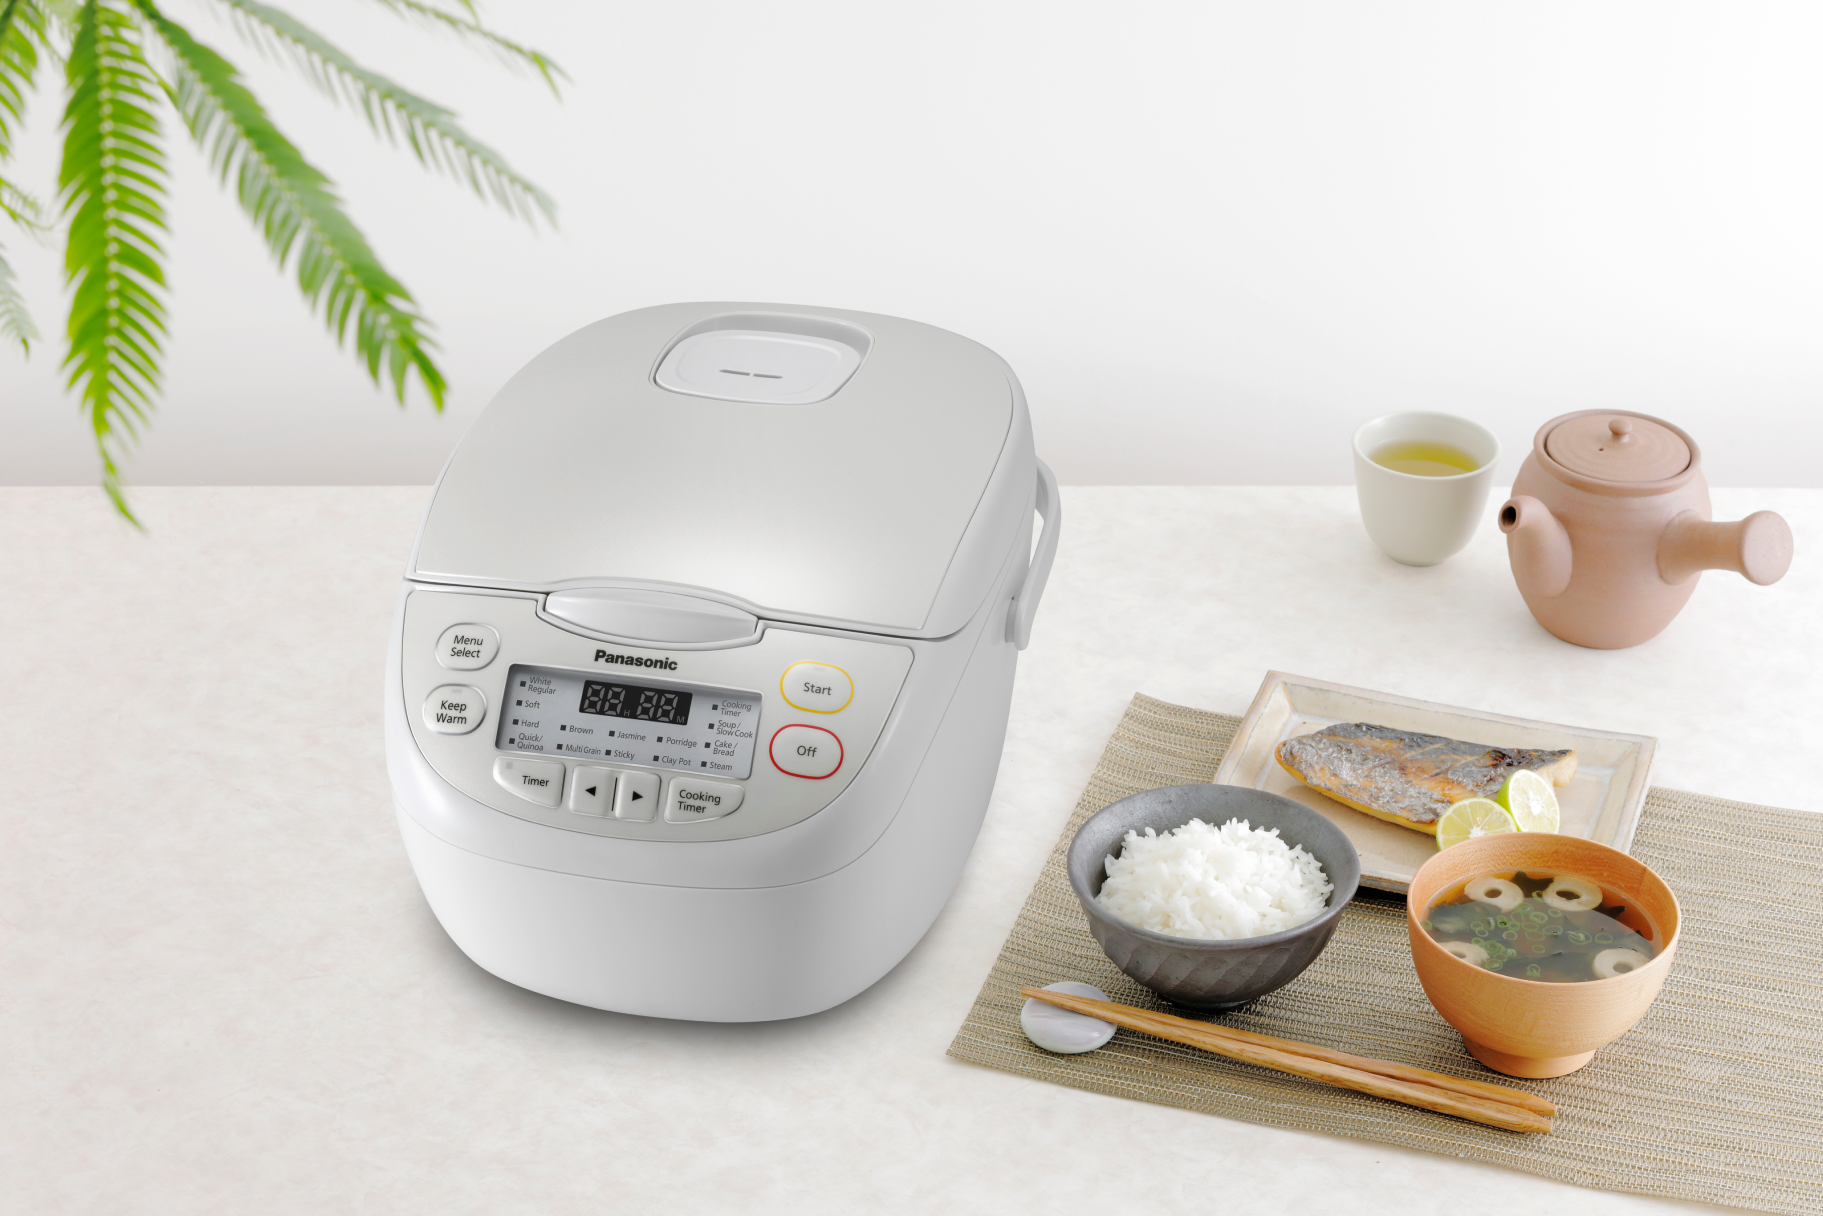 Panasonic 6-Cup Rice Cooker with One-Touch Automatic Cooking